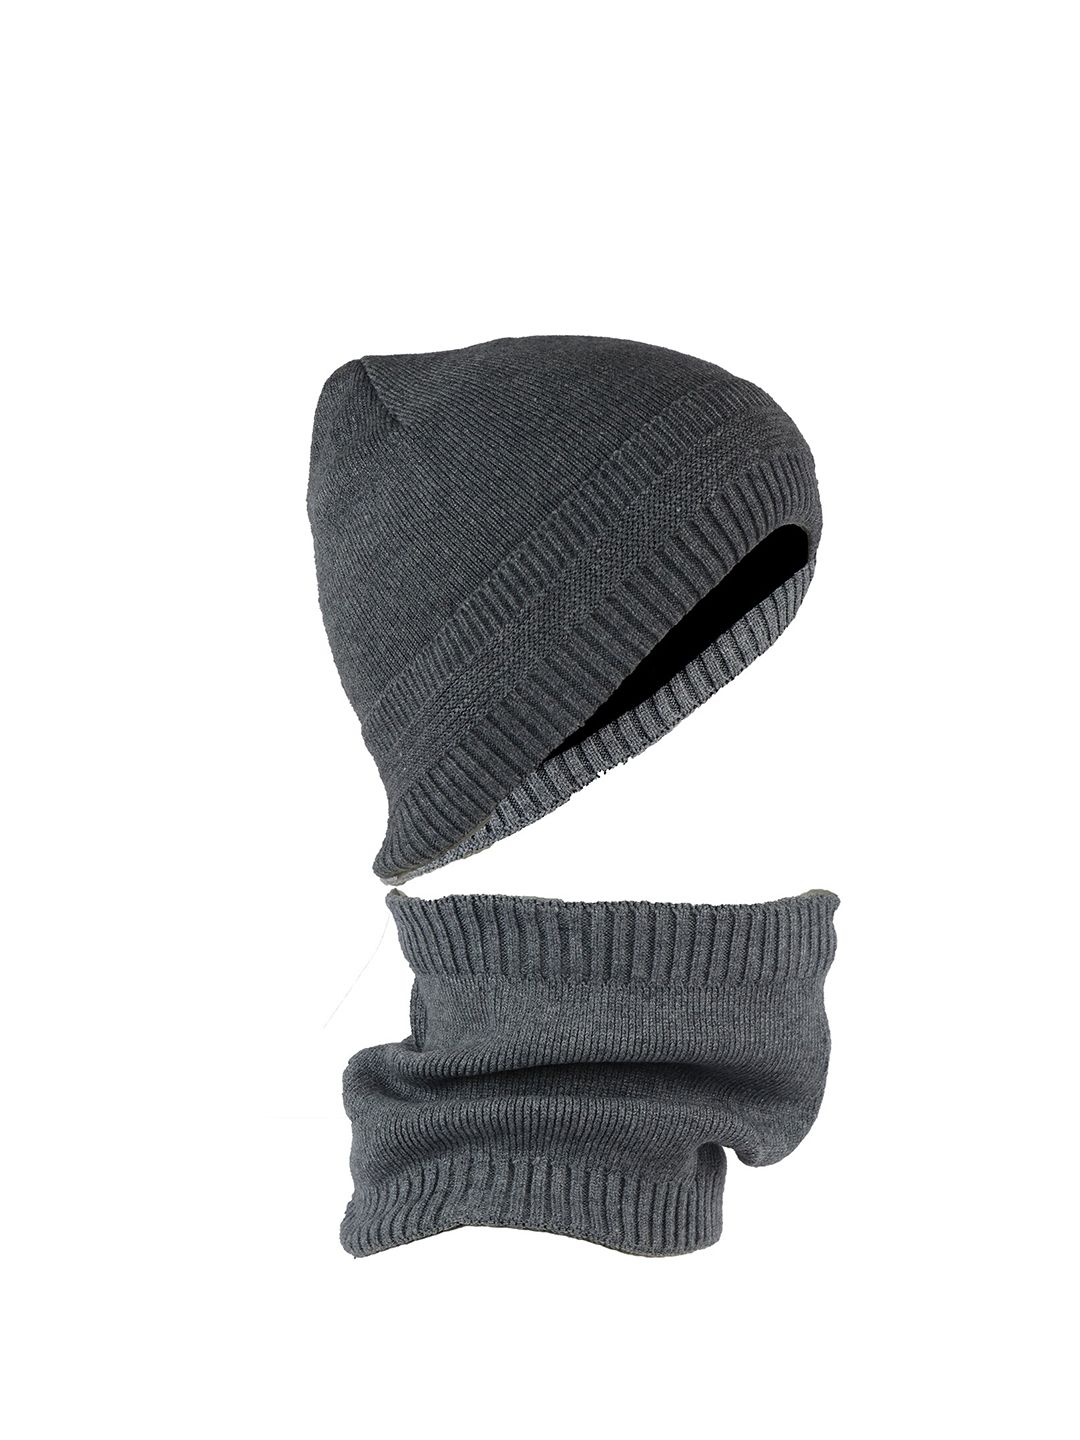 iSWEVEN Unisex Grey Beanie with Neck Warmer Scarf Price in India